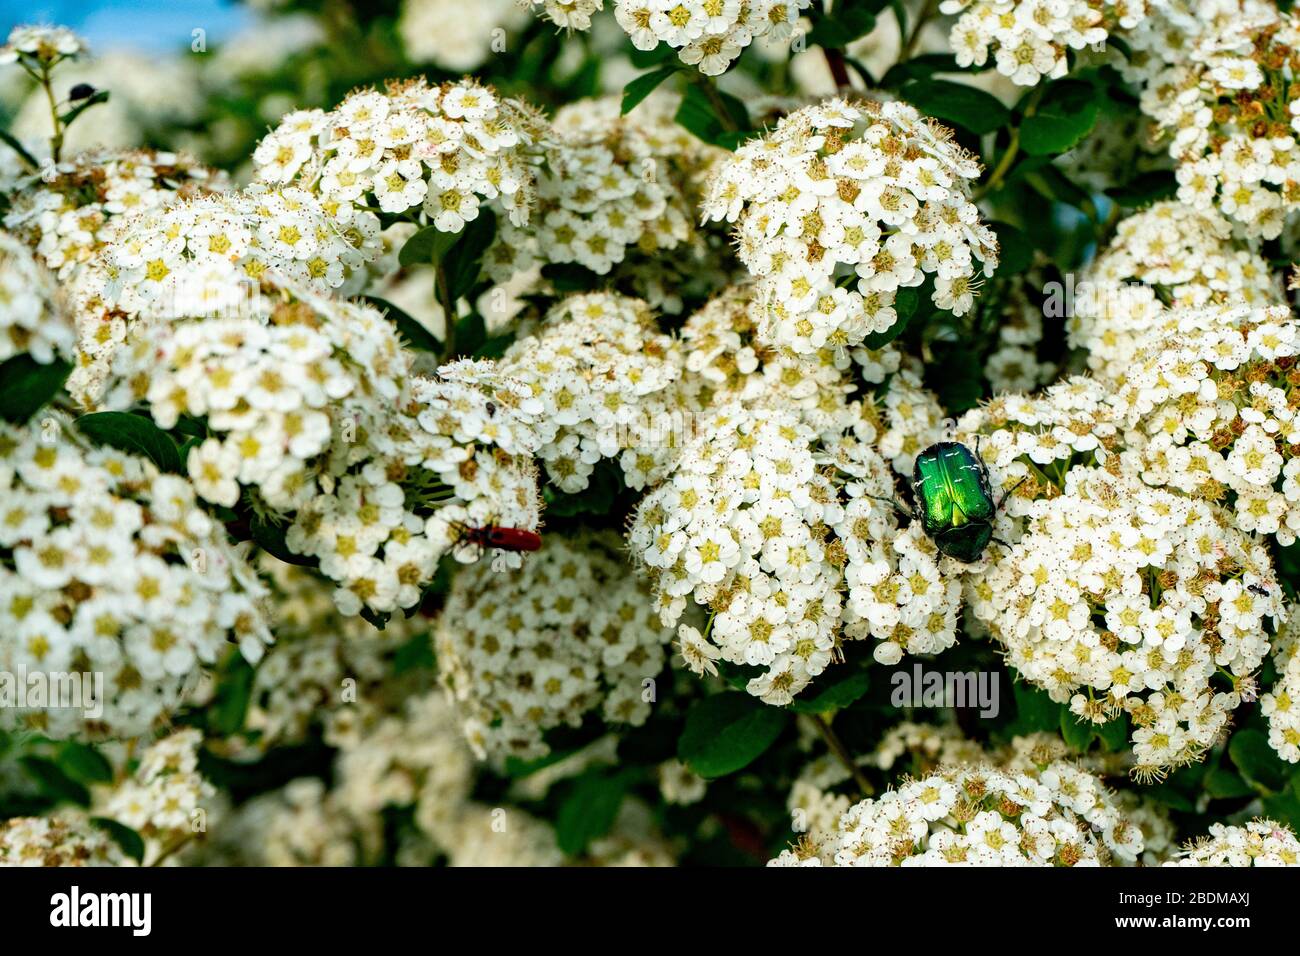 Blooming spirea or meadowsweet. Branches with white flowers. Beetle Eats Nectar Stock Photo